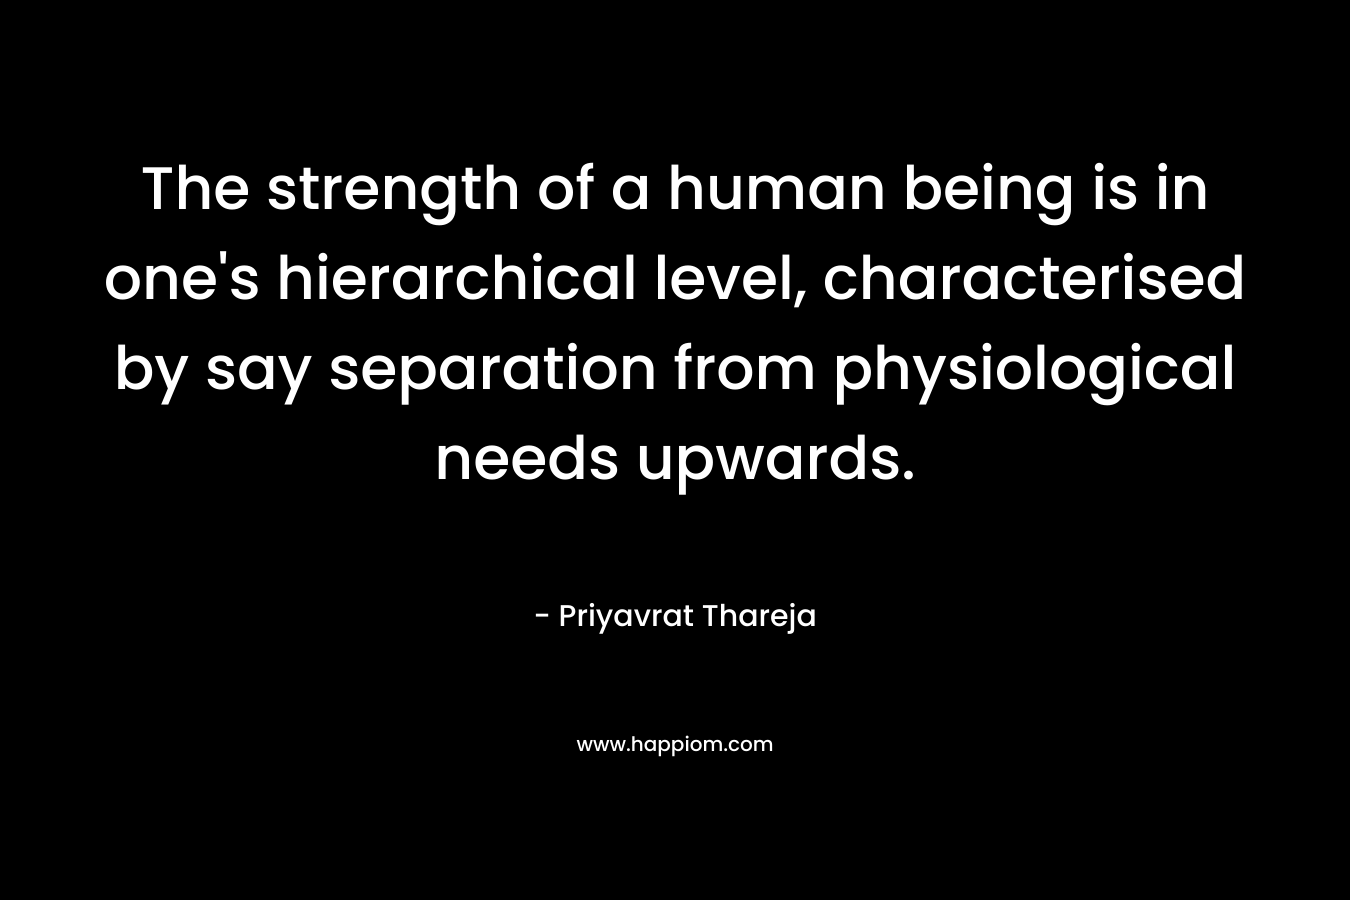 The strength of a human being is in one's hierarchical level, characterised by say separation from physiological needs upwards.